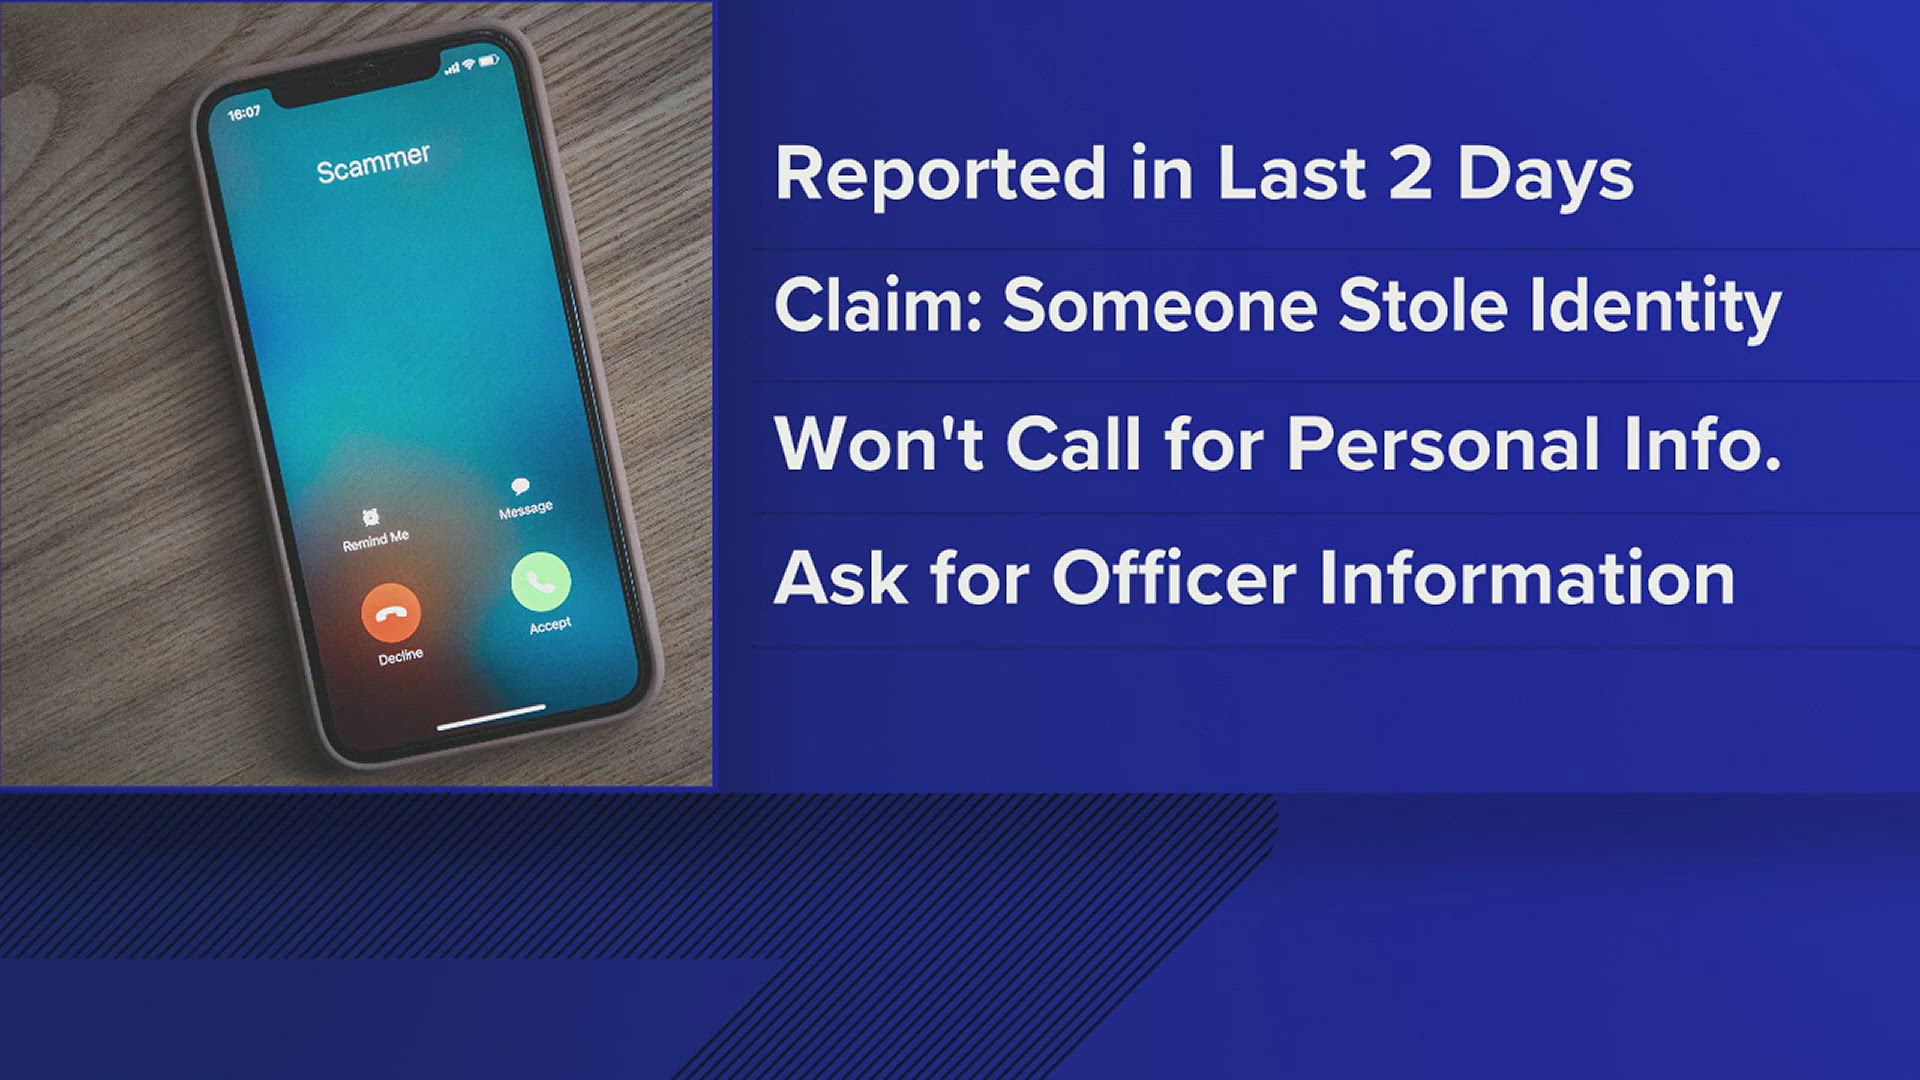 ISP said that scammers have been impersonating officers and claiming someone has attempted to steal the victim's identity.